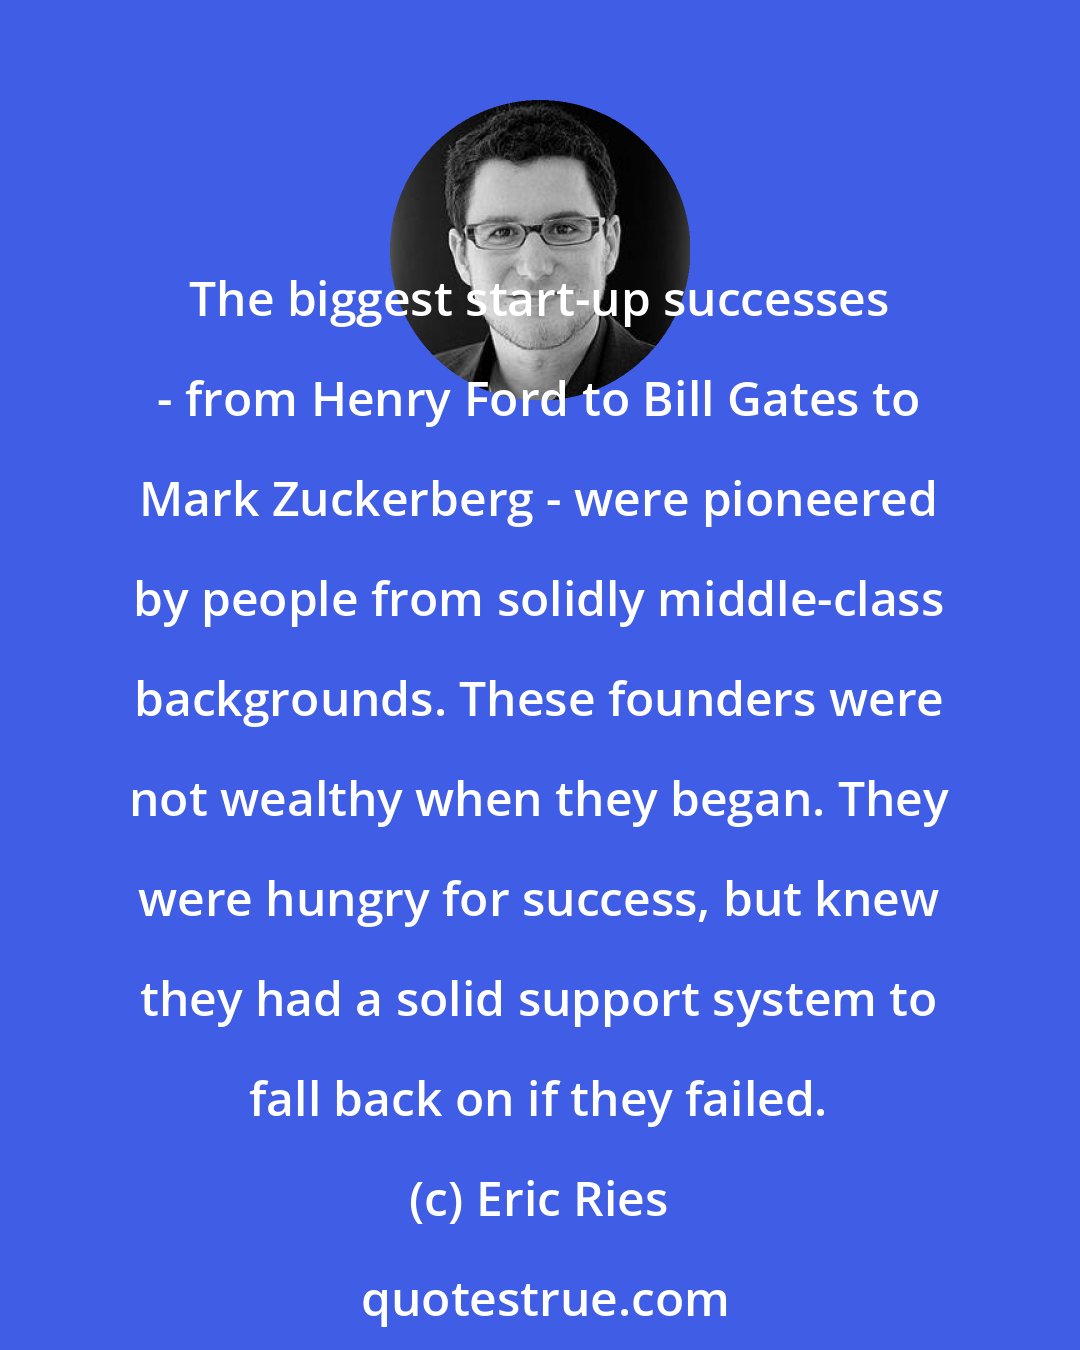 Eric Ries: The biggest start-up successes - from Henry Ford to Bill Gates to Mark Zuckerberg - were pioneered by people from solidly middle-class backgrounds. These founders were not wealthy when they began. They were hungry for success, but knew they had a solid support system to fall back on if they failed.